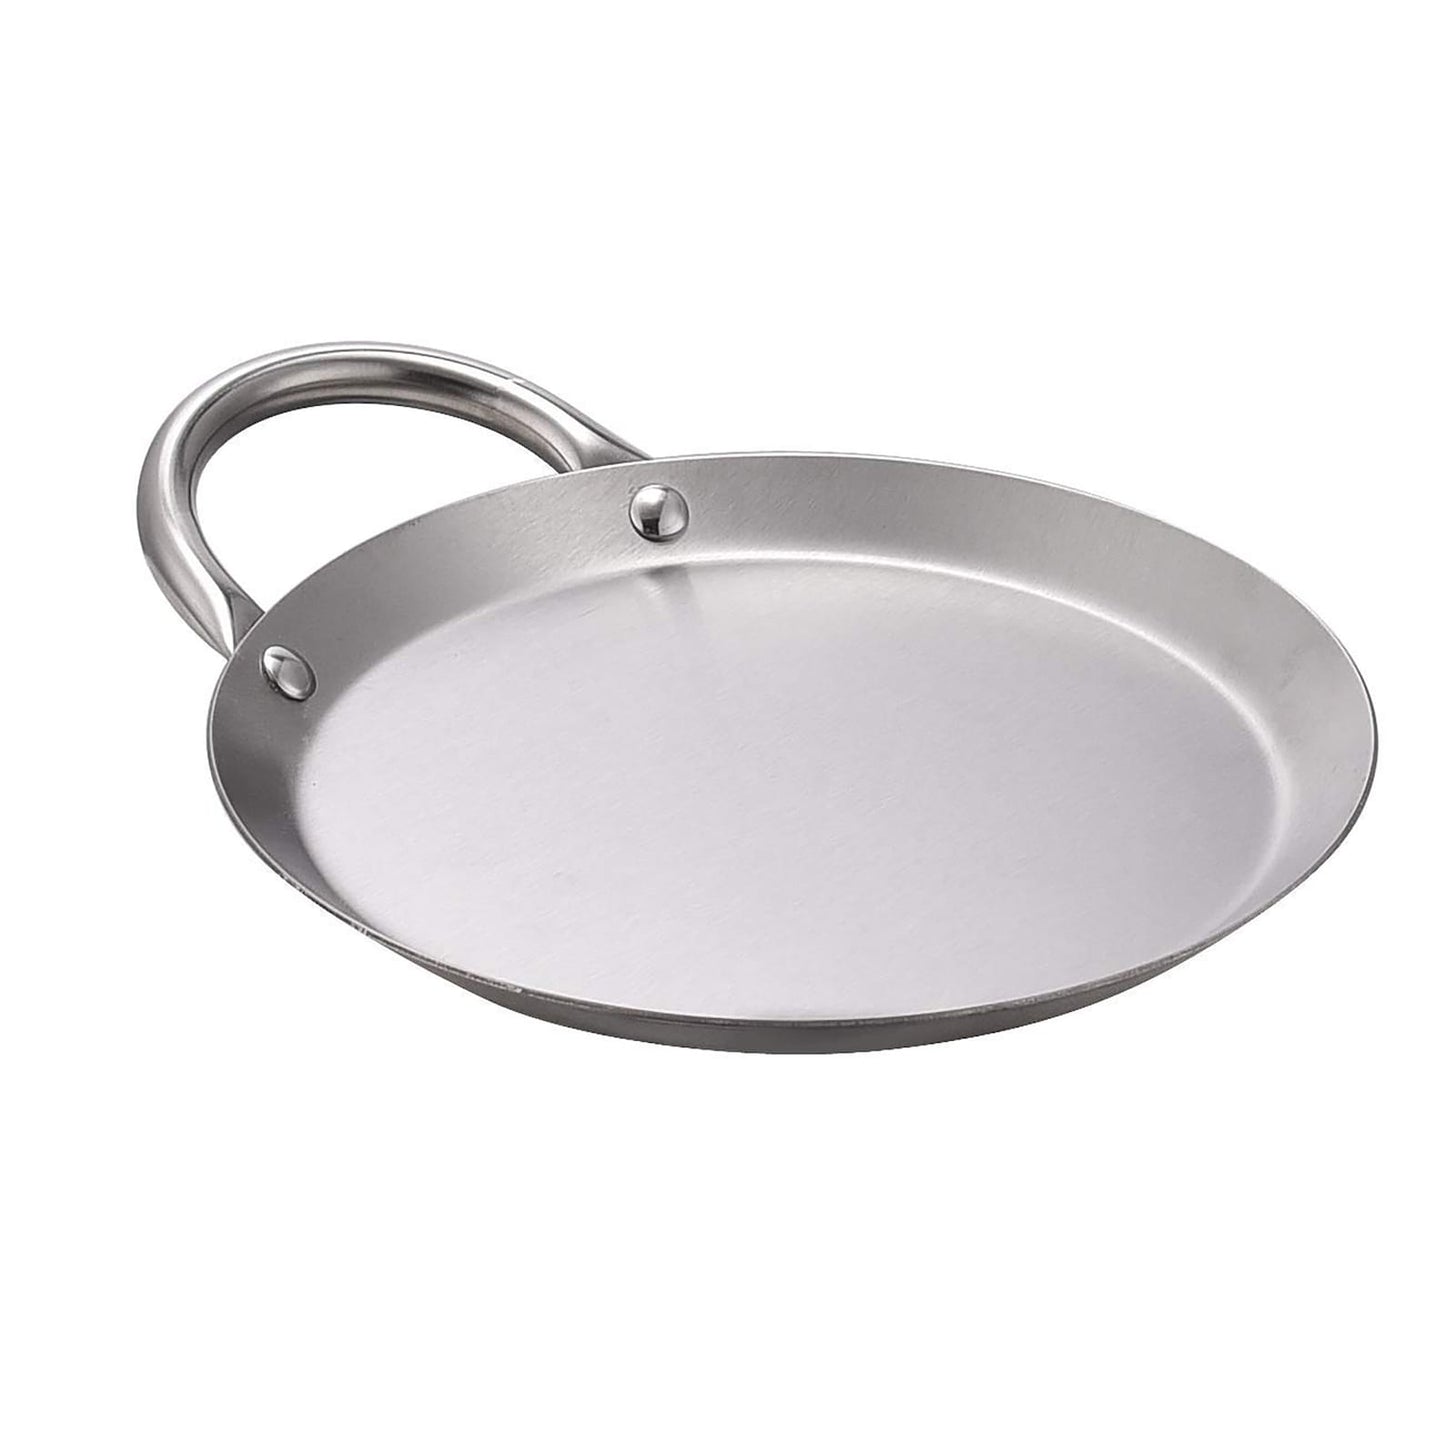 14” Round Stainless Steel Fry Pan Comal with 2 Handles